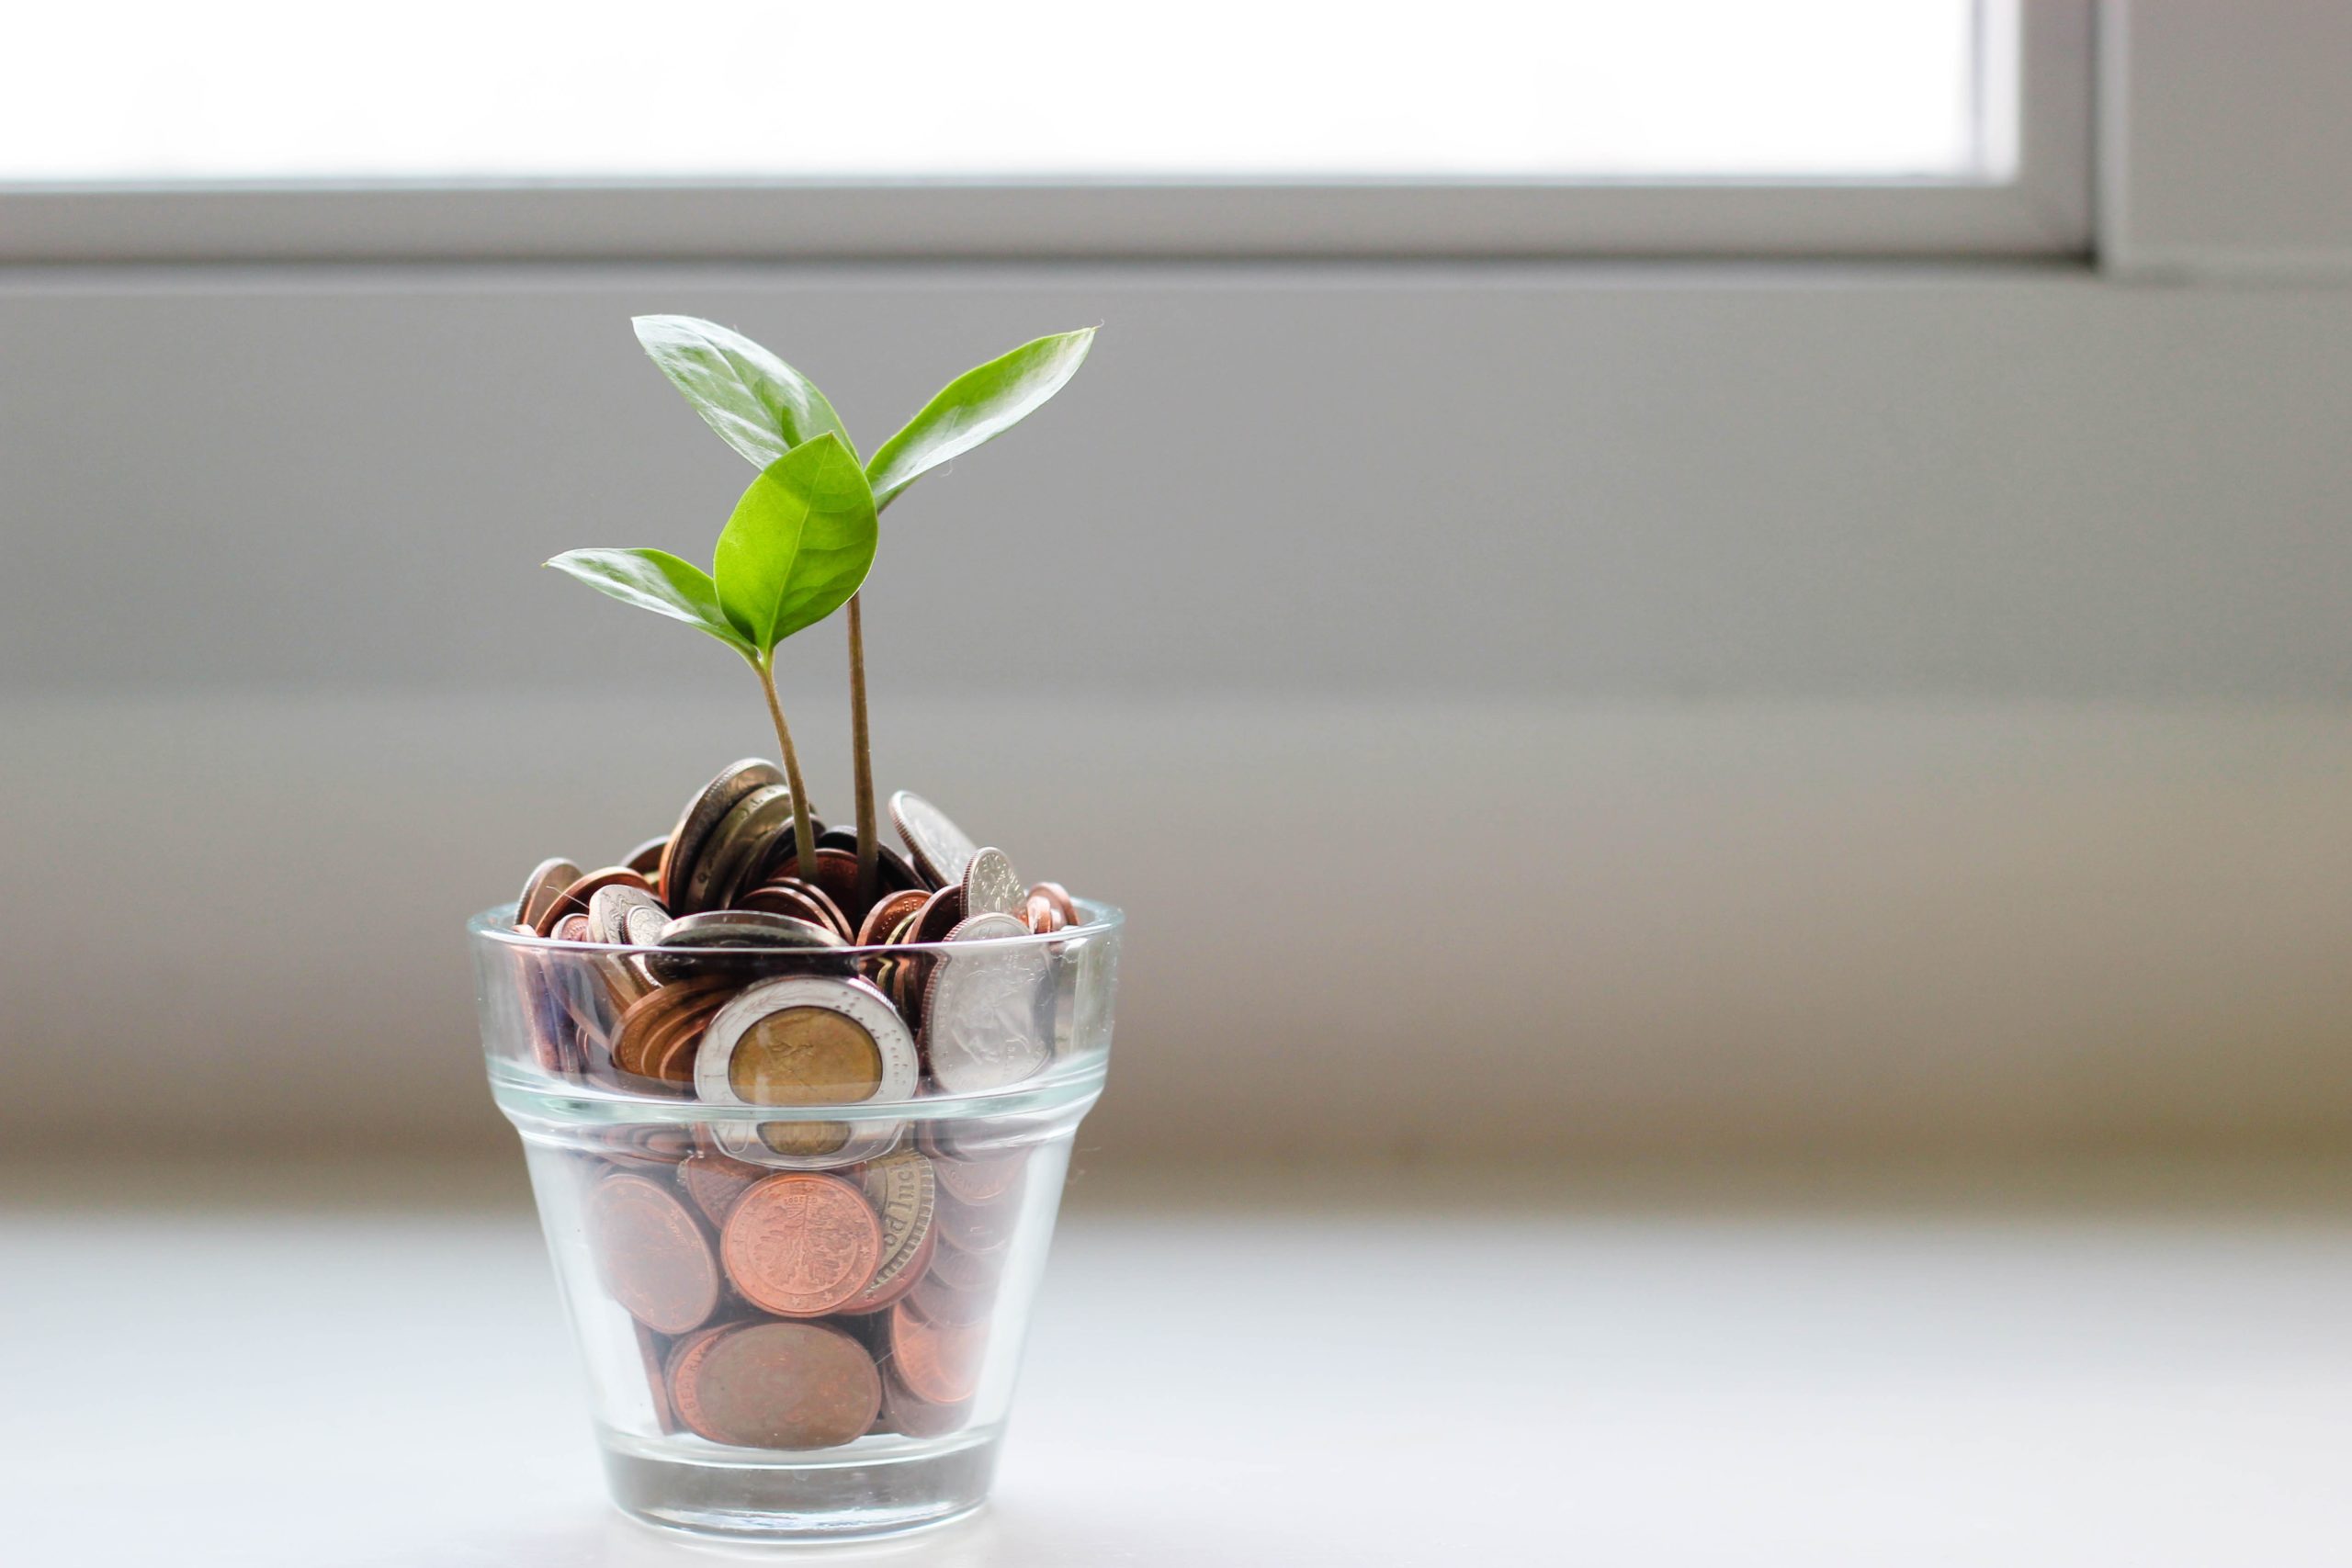 A small plant growing in a pot of coins.